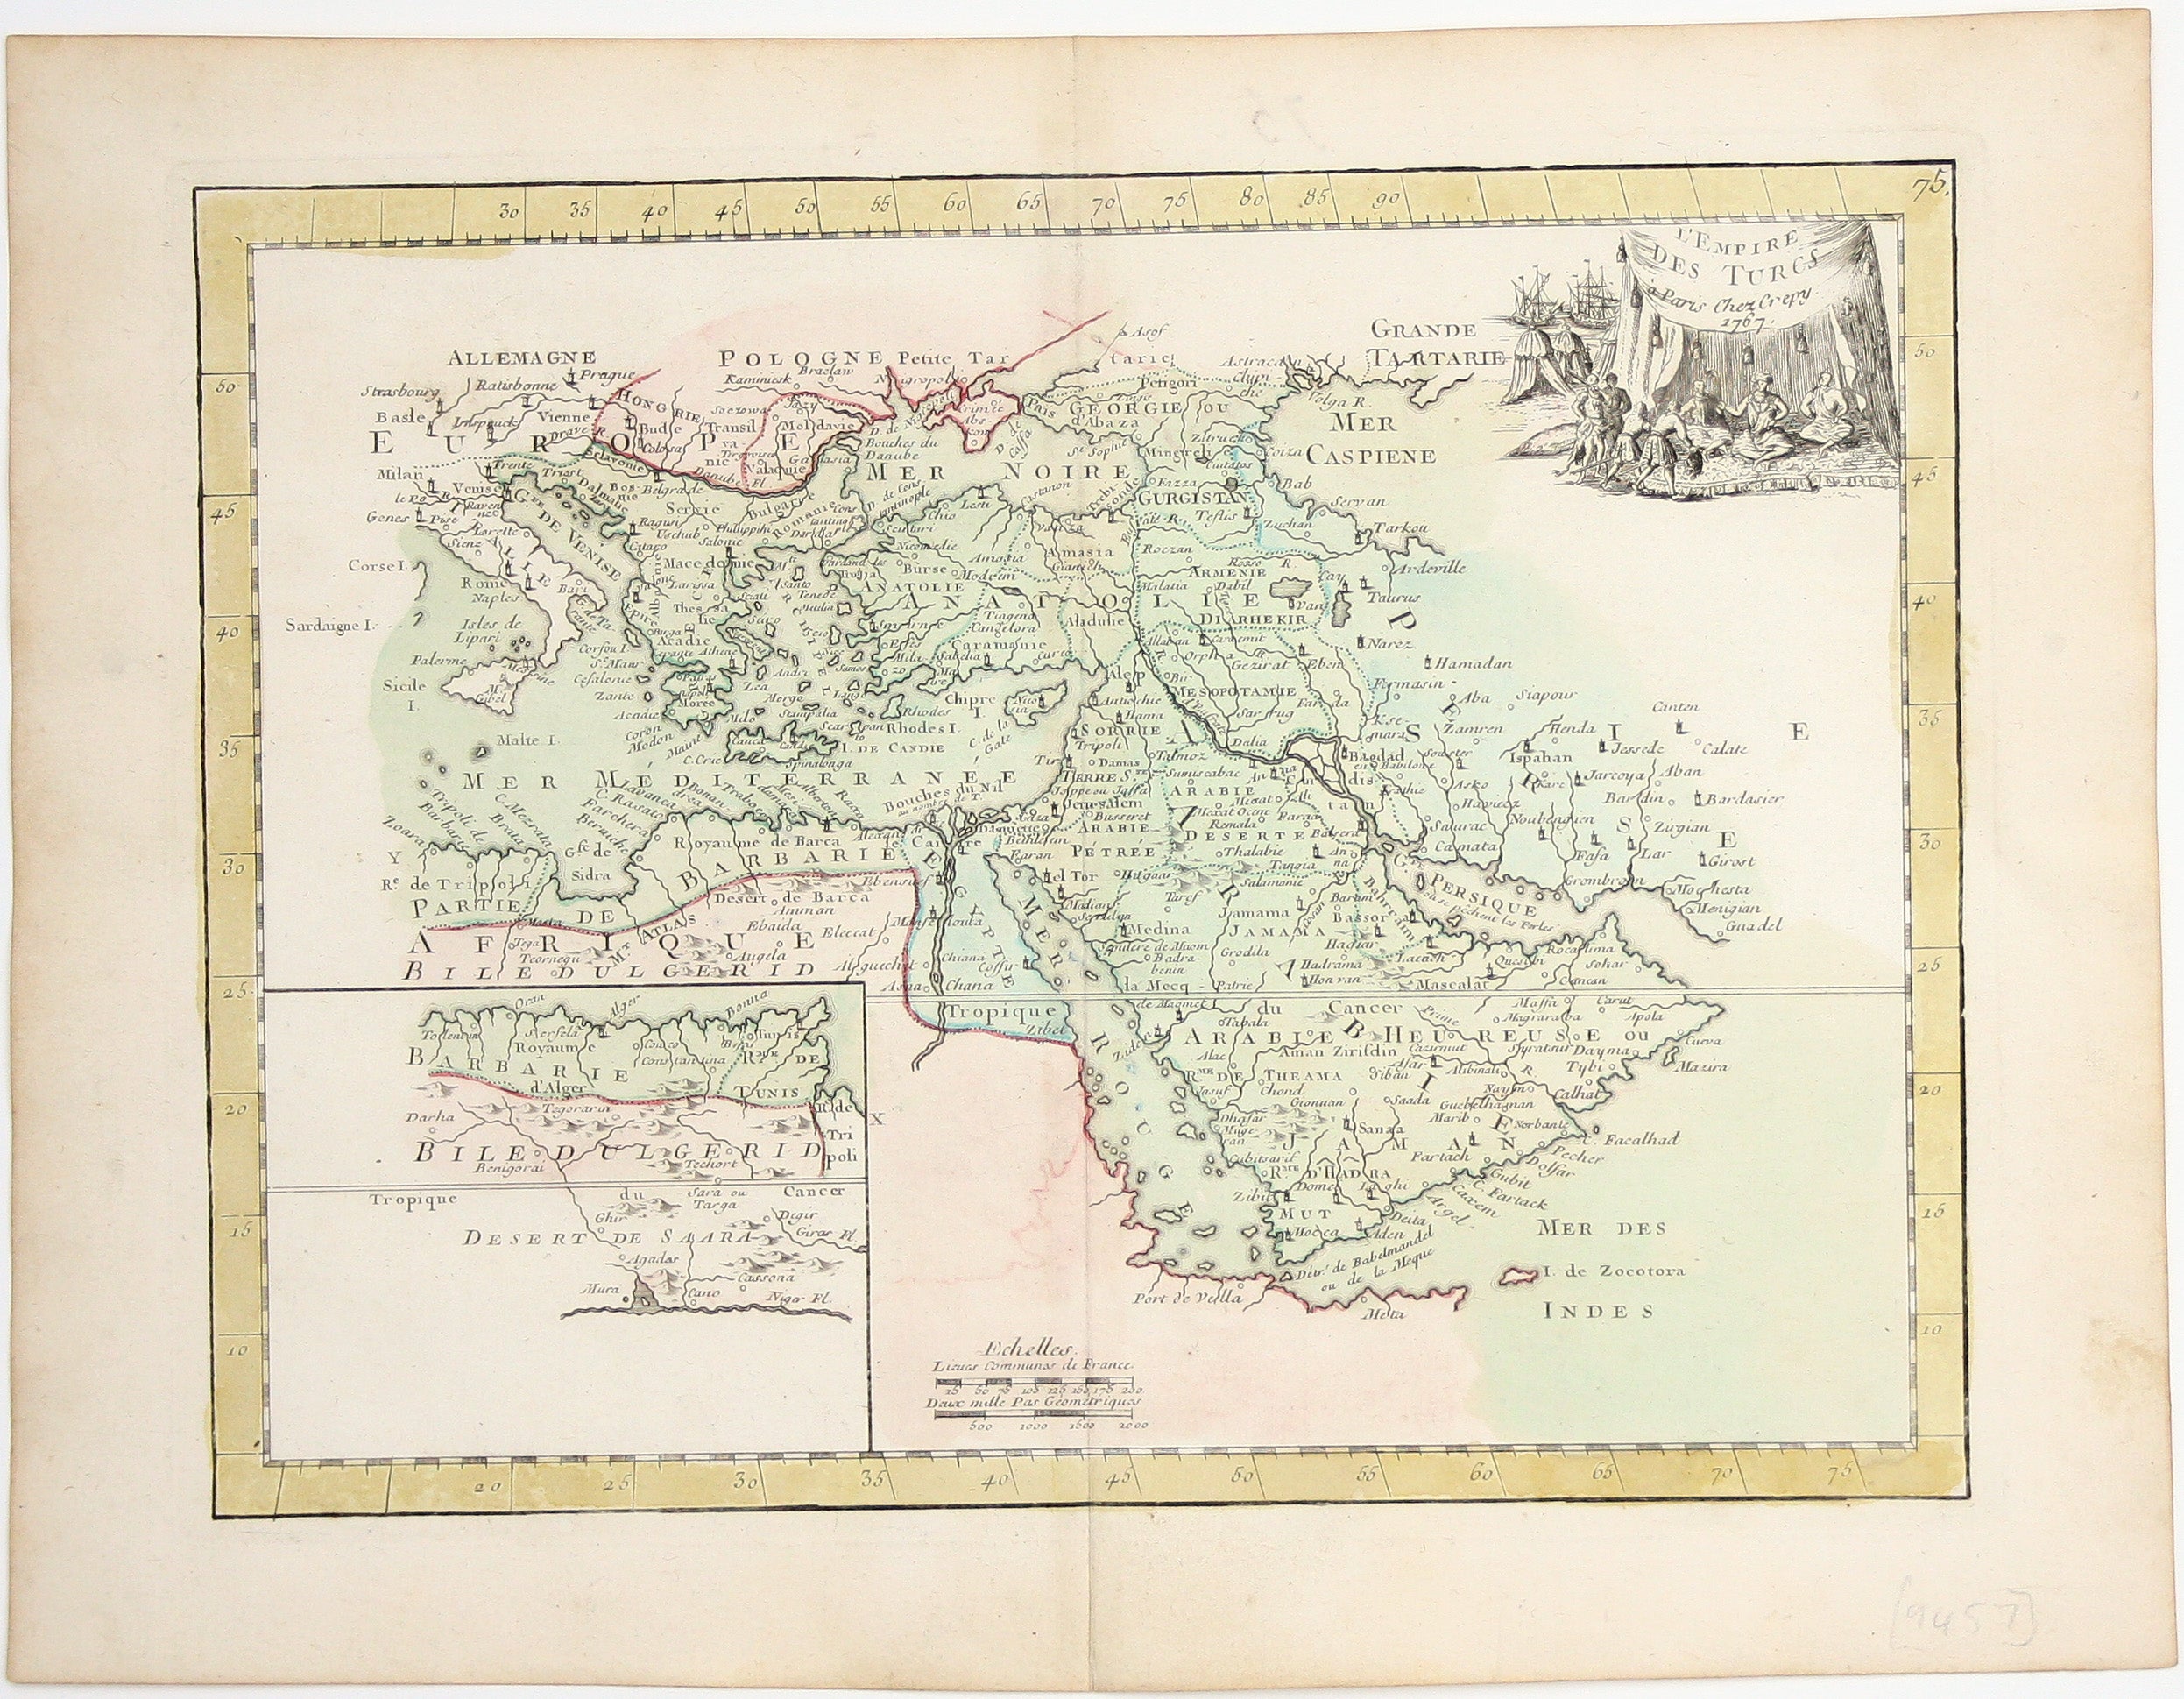 Le Rouge’s Map of the Turkish Empire – Crépy Edition